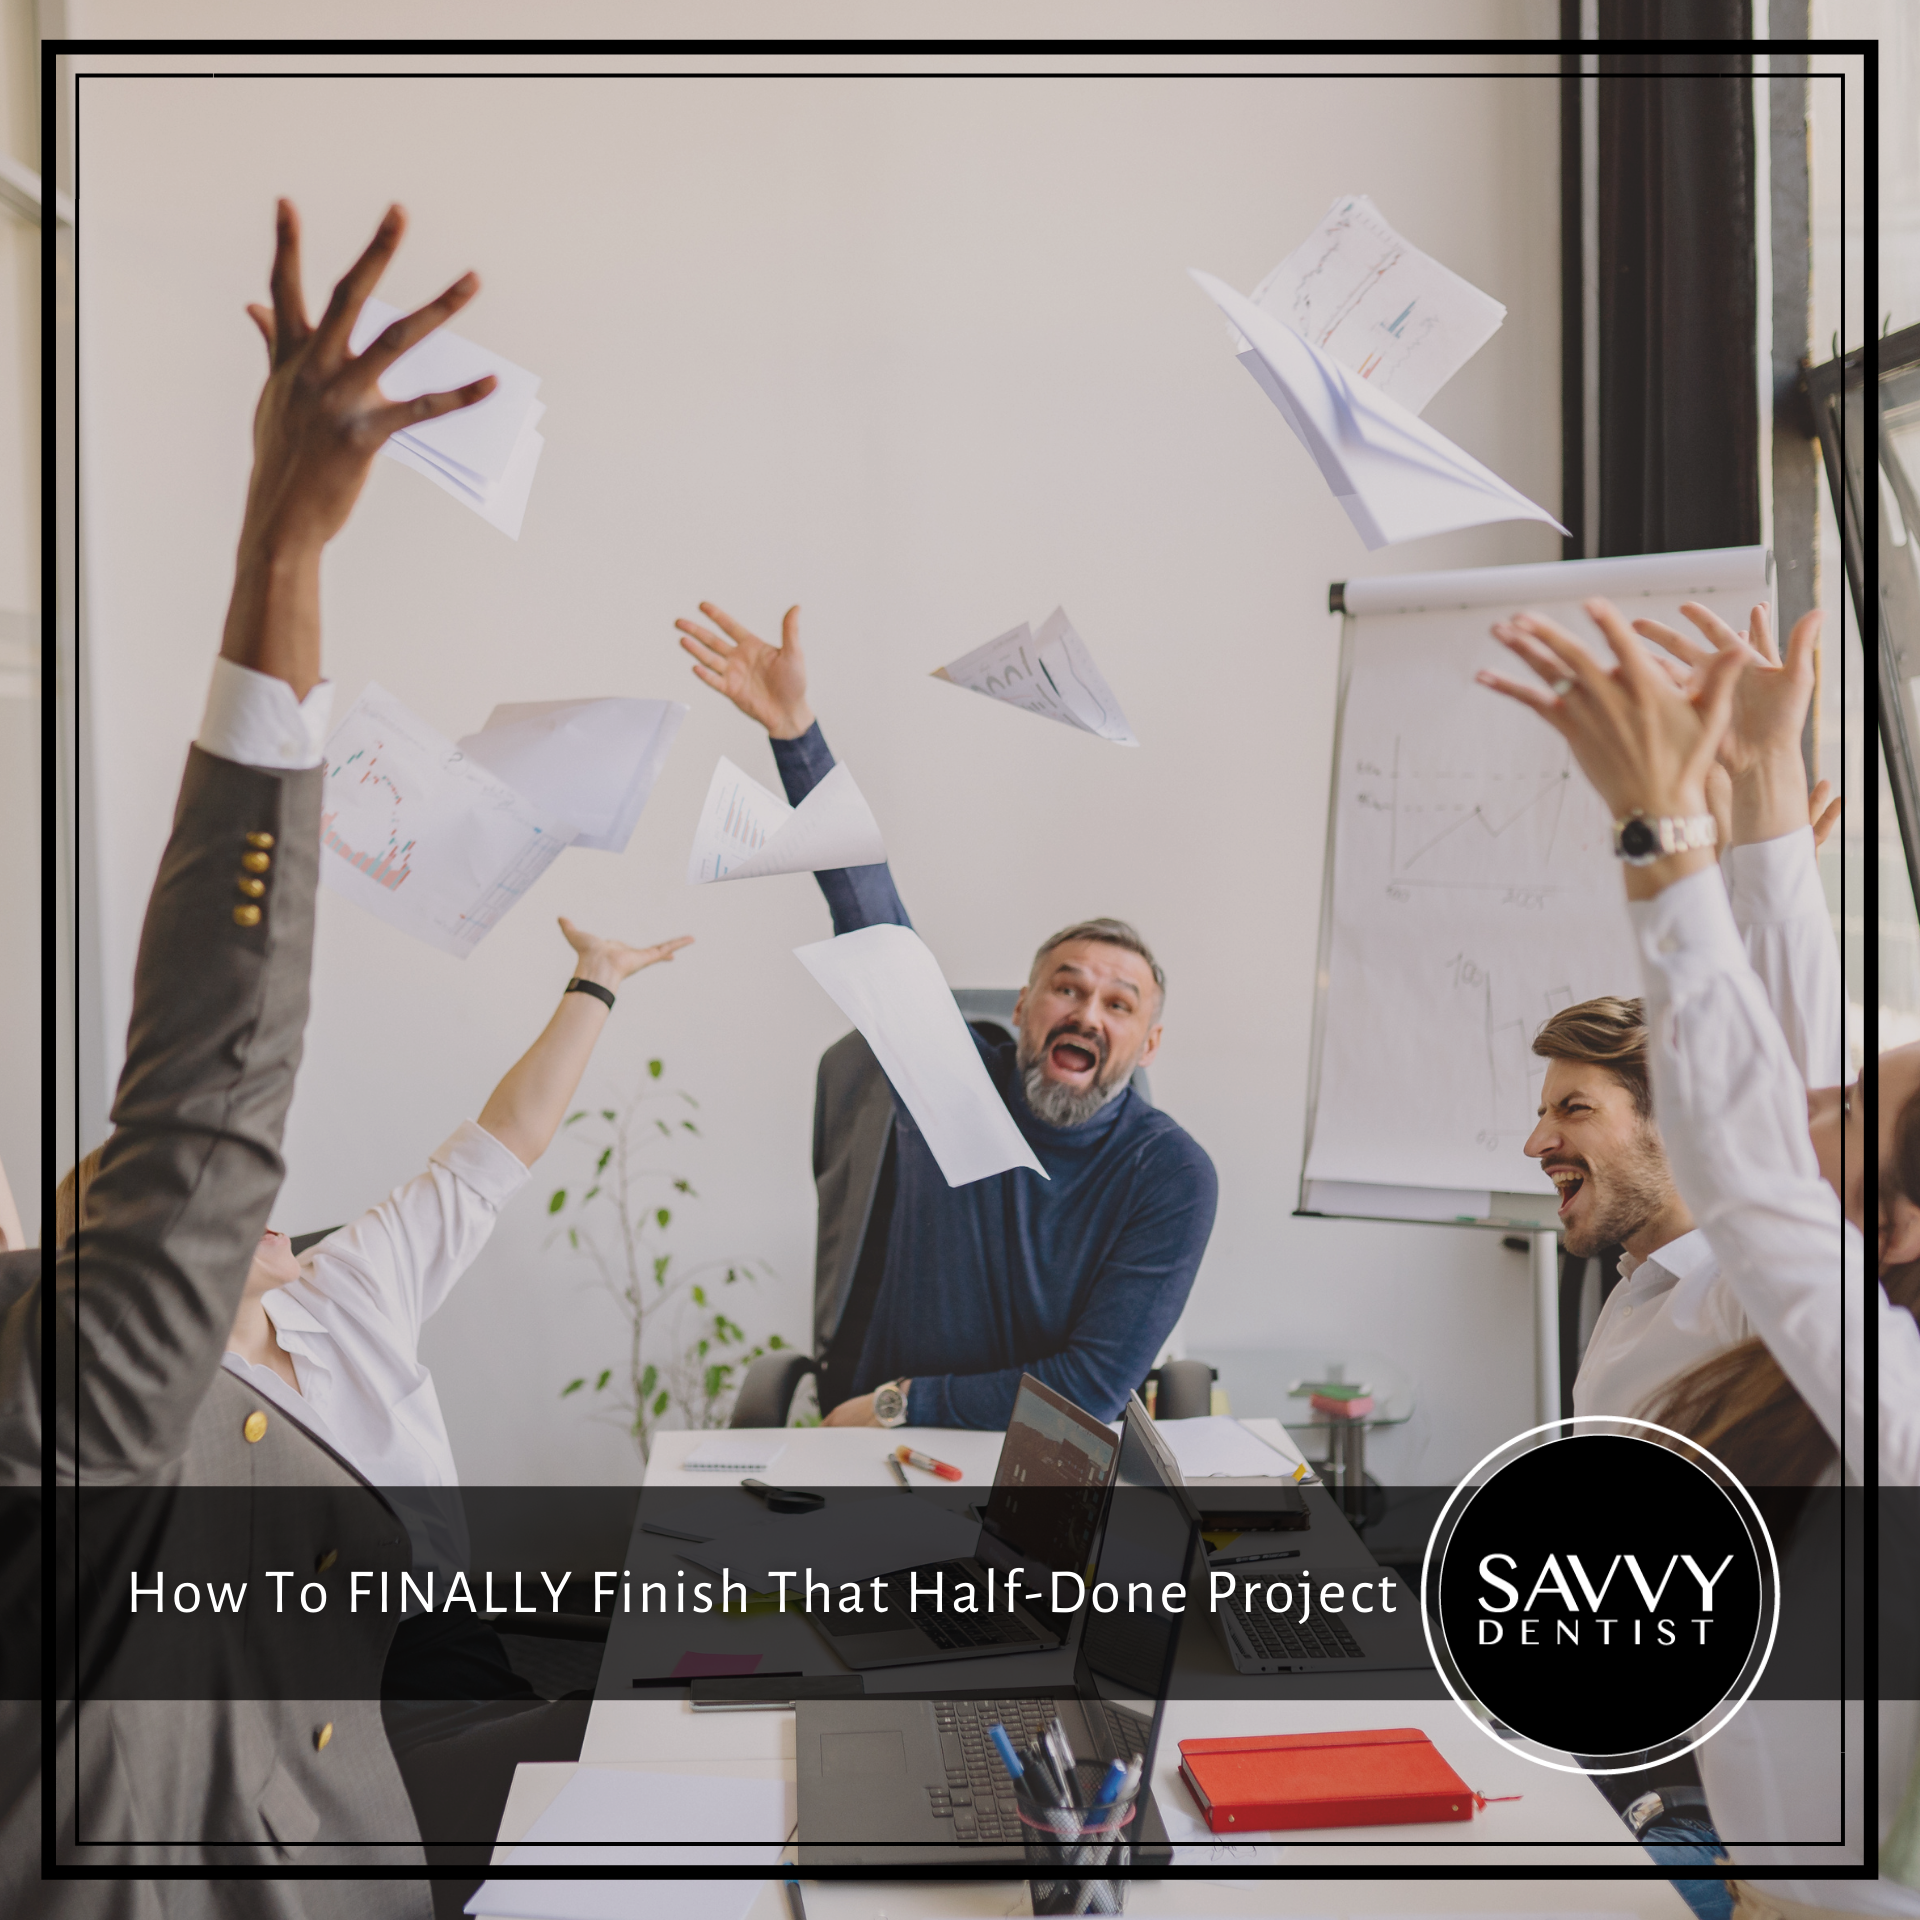 How to FINALLY Finish that Half-Done Project